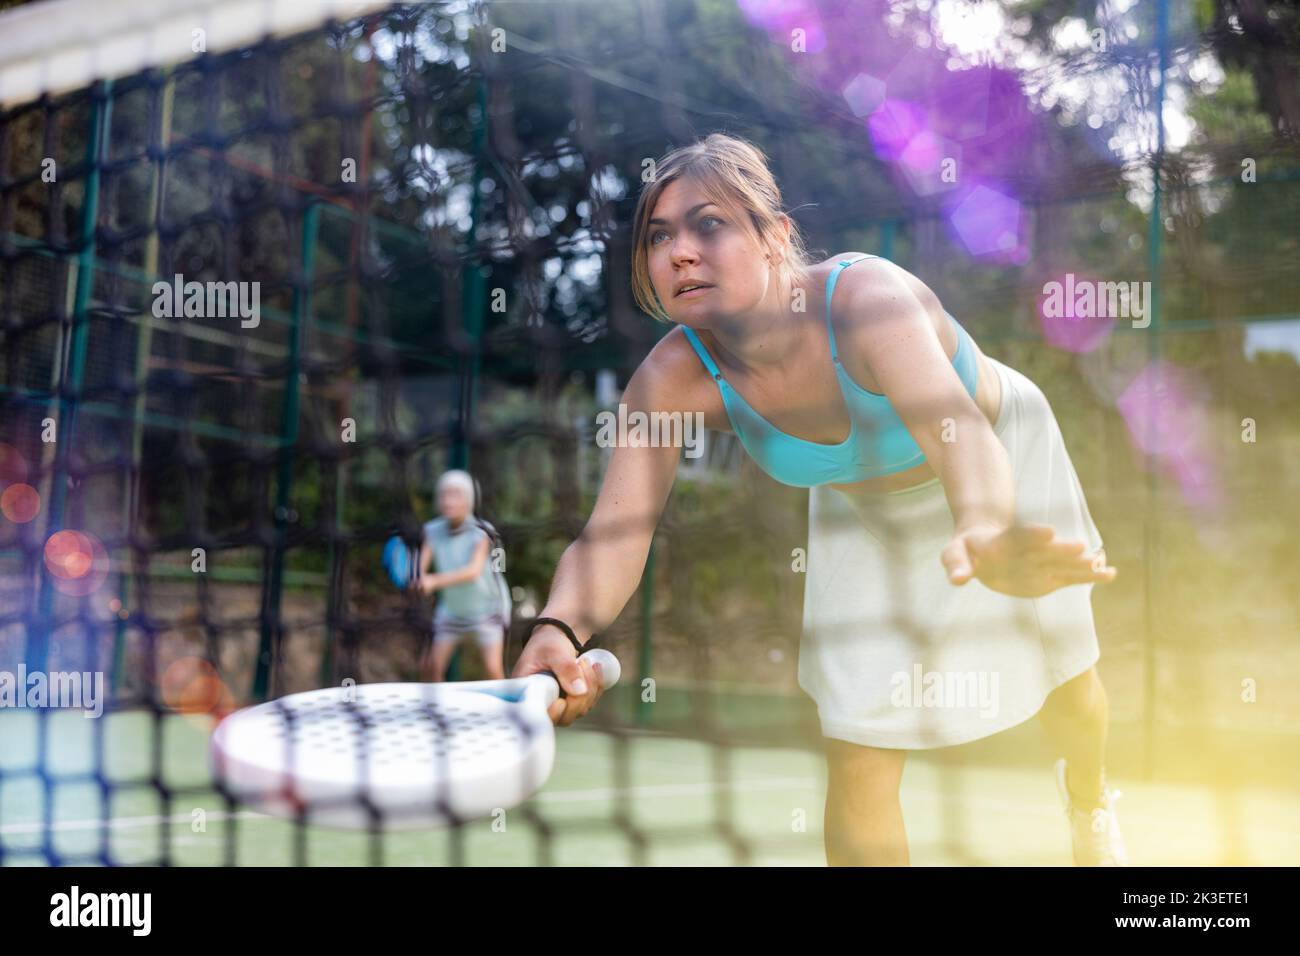 View through net of young female paddle tennis player hitting ball Stock Photo